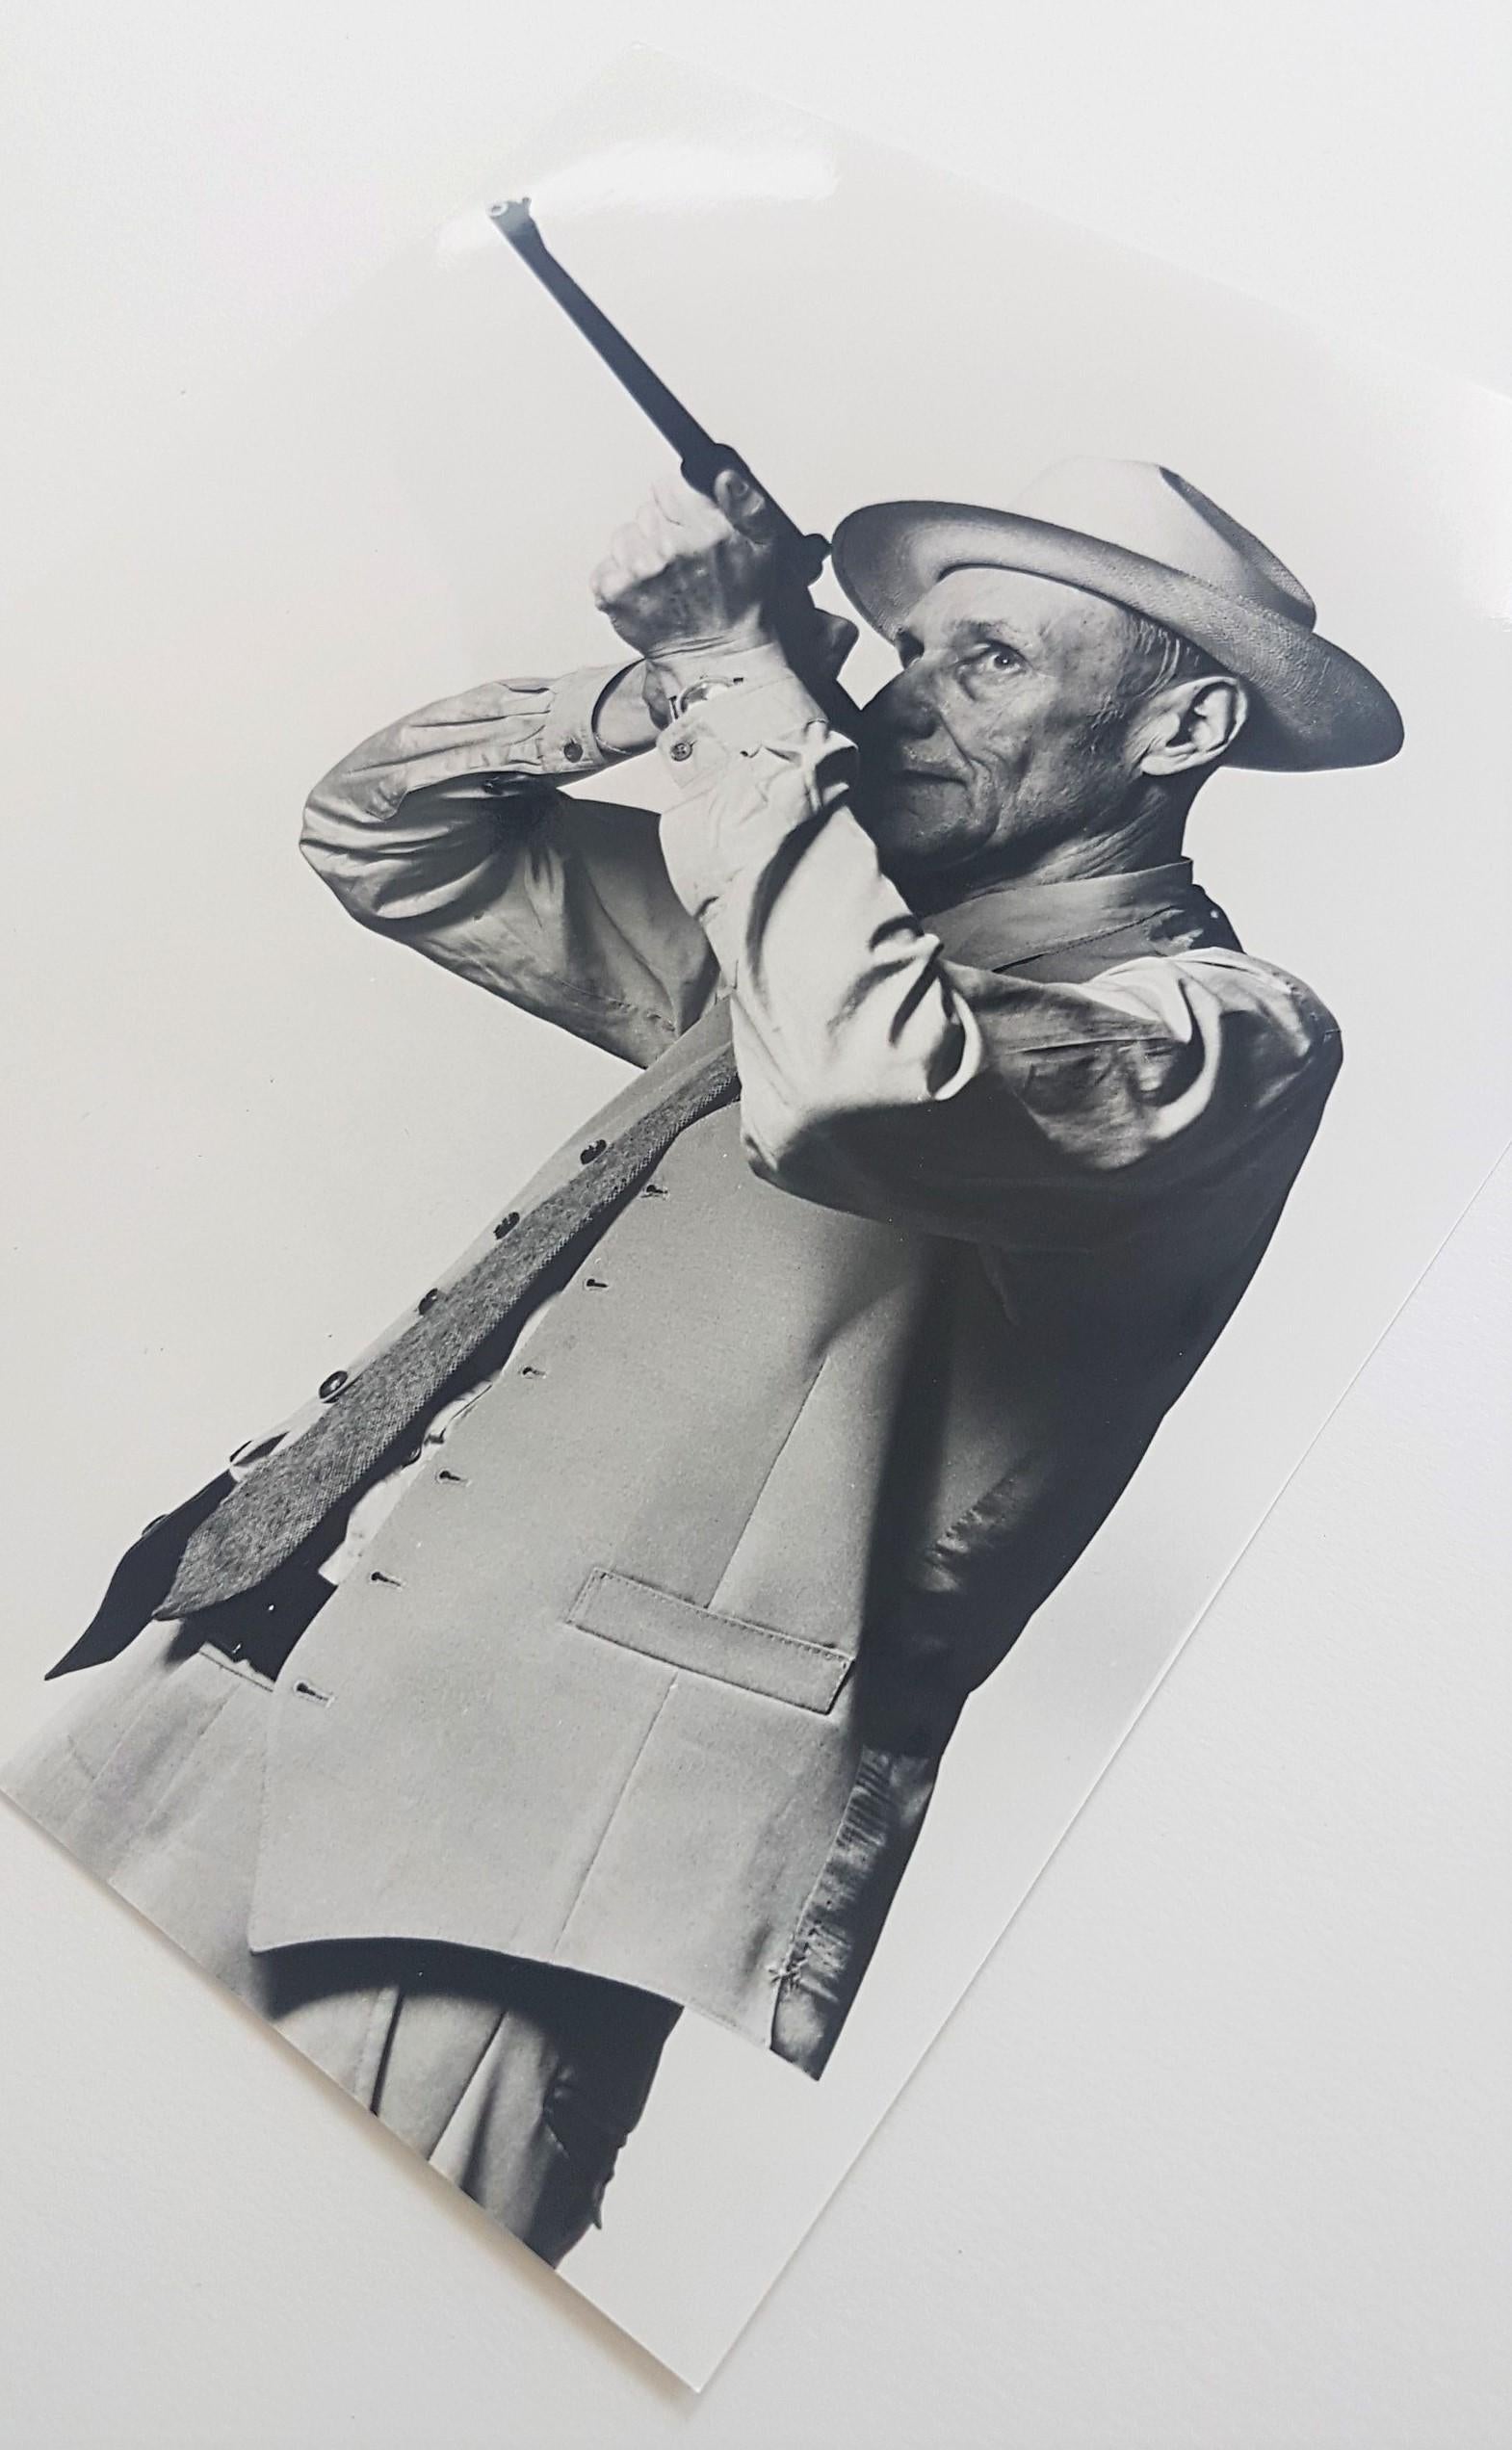 William S. Burroughs (Stamped) (~30% OFF LIST PRICE, LIMITED TIME) - Photograph by Robert Mapplethorpe